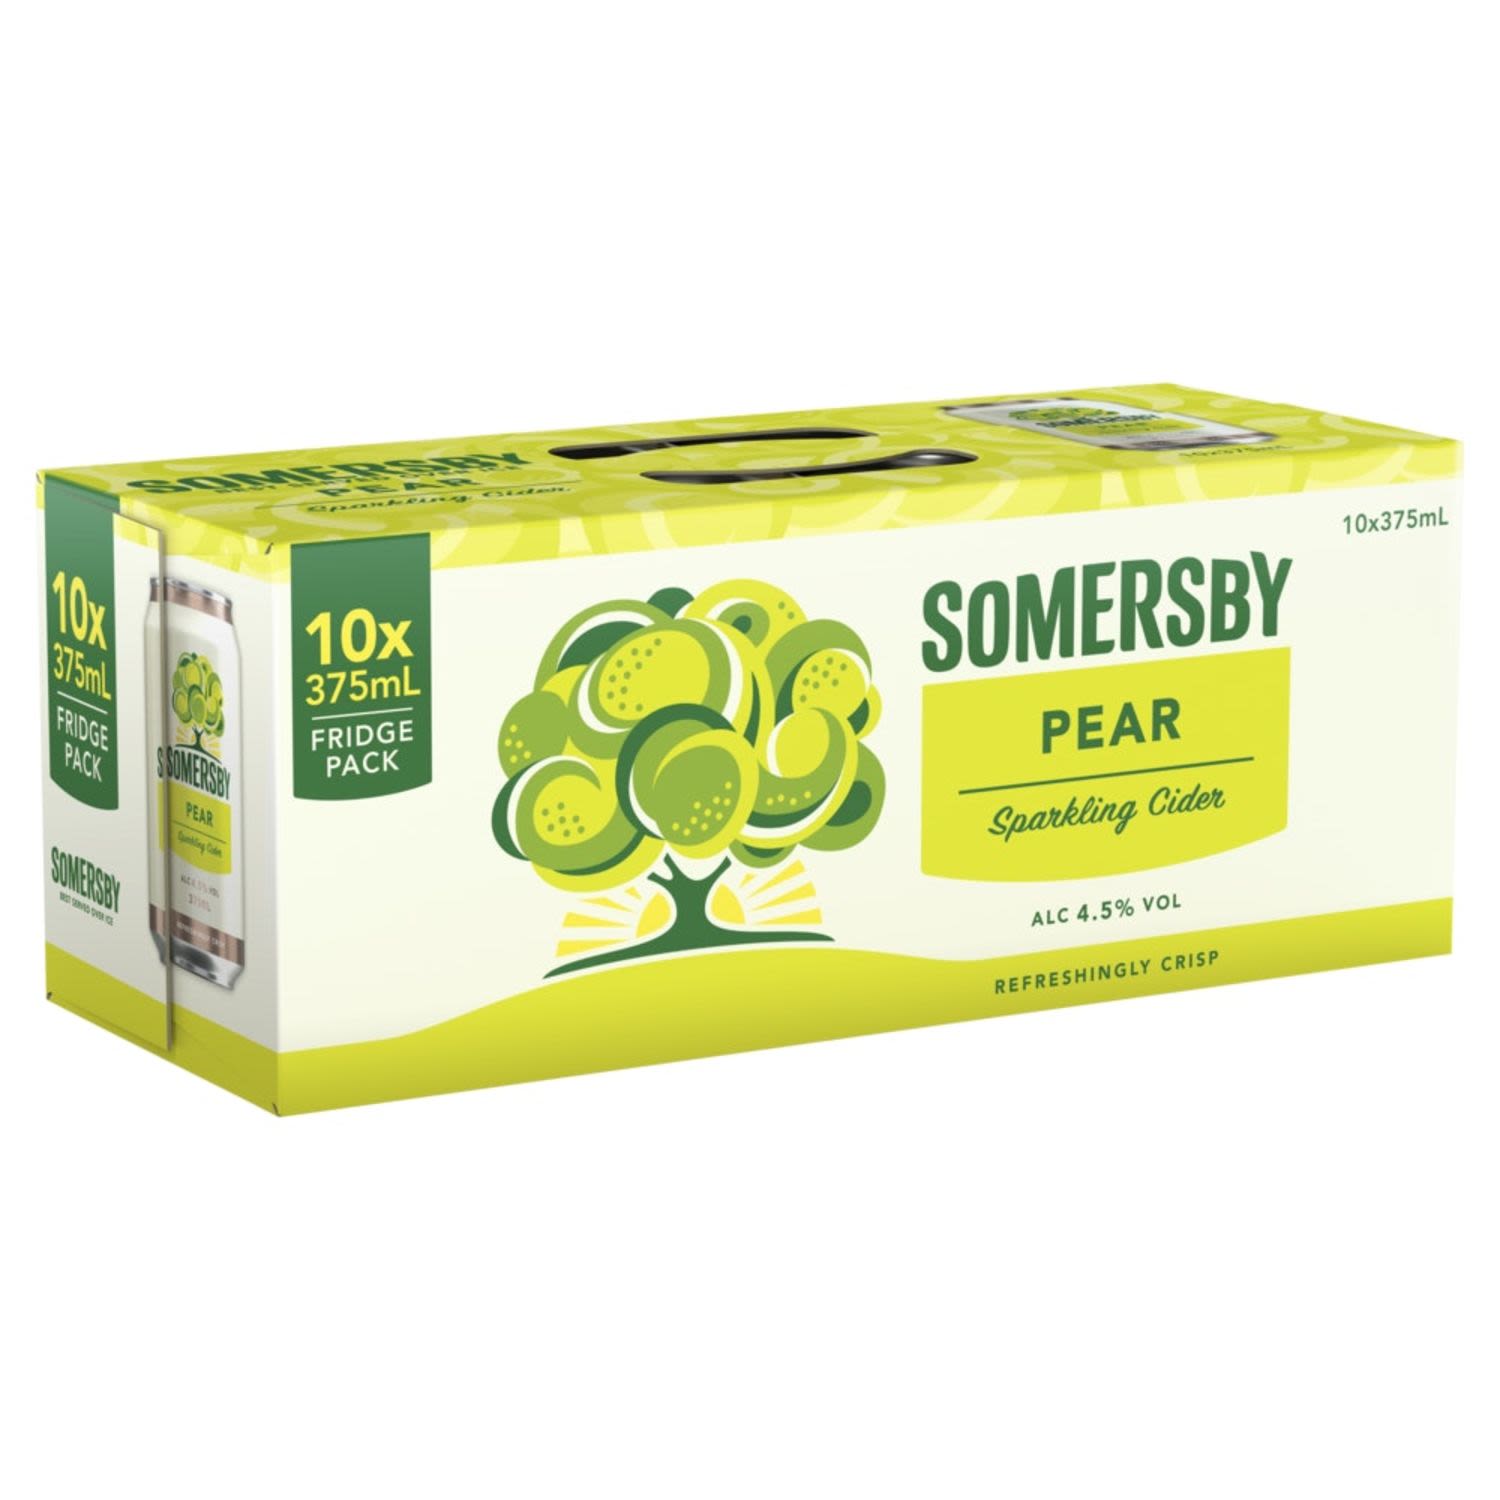 Somersby Pear Cider is a refreshing and crisp cider made from fermented pear juice and natural pear flavouring. There are no artificial sweeteners, flavours or colourings added and it's sparkling and refreshing nature makes it a perfect addition to any Sunday afternoon.<br /> <br />Alcohol Volume: 4.50%<br /><br />Pack Format: 10 Pack<br /><br />Standard Drinks: 1.3</br /><br />Pack Type: Can<br /><br />Country of Origin: Australia<br />